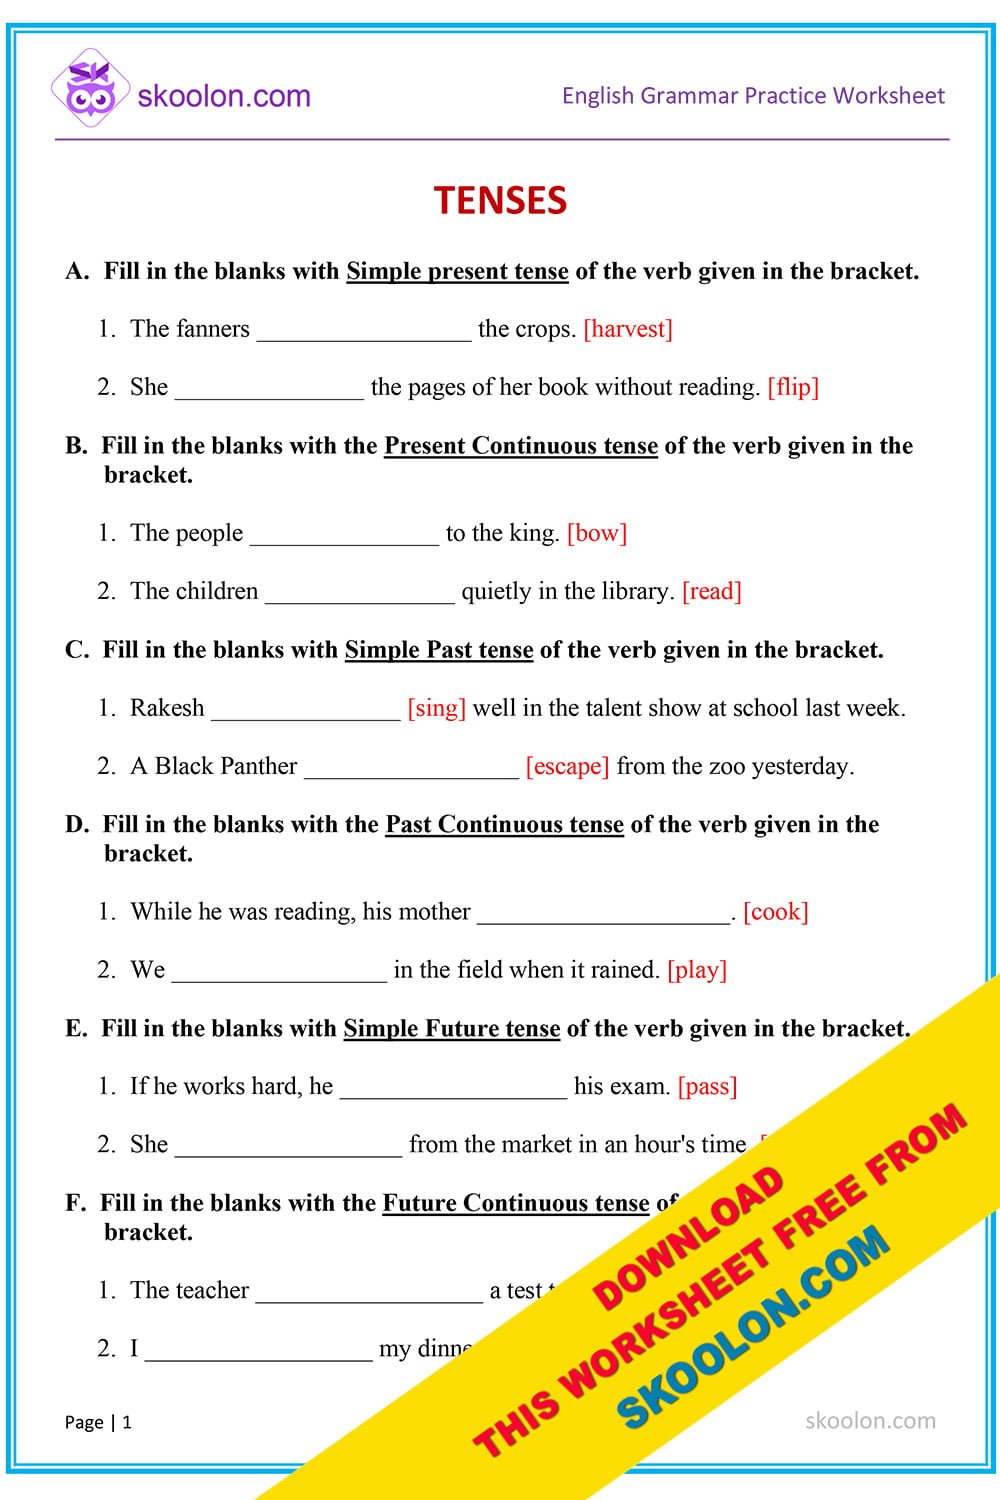 Tenses Worksheet For Class 3 With Answers